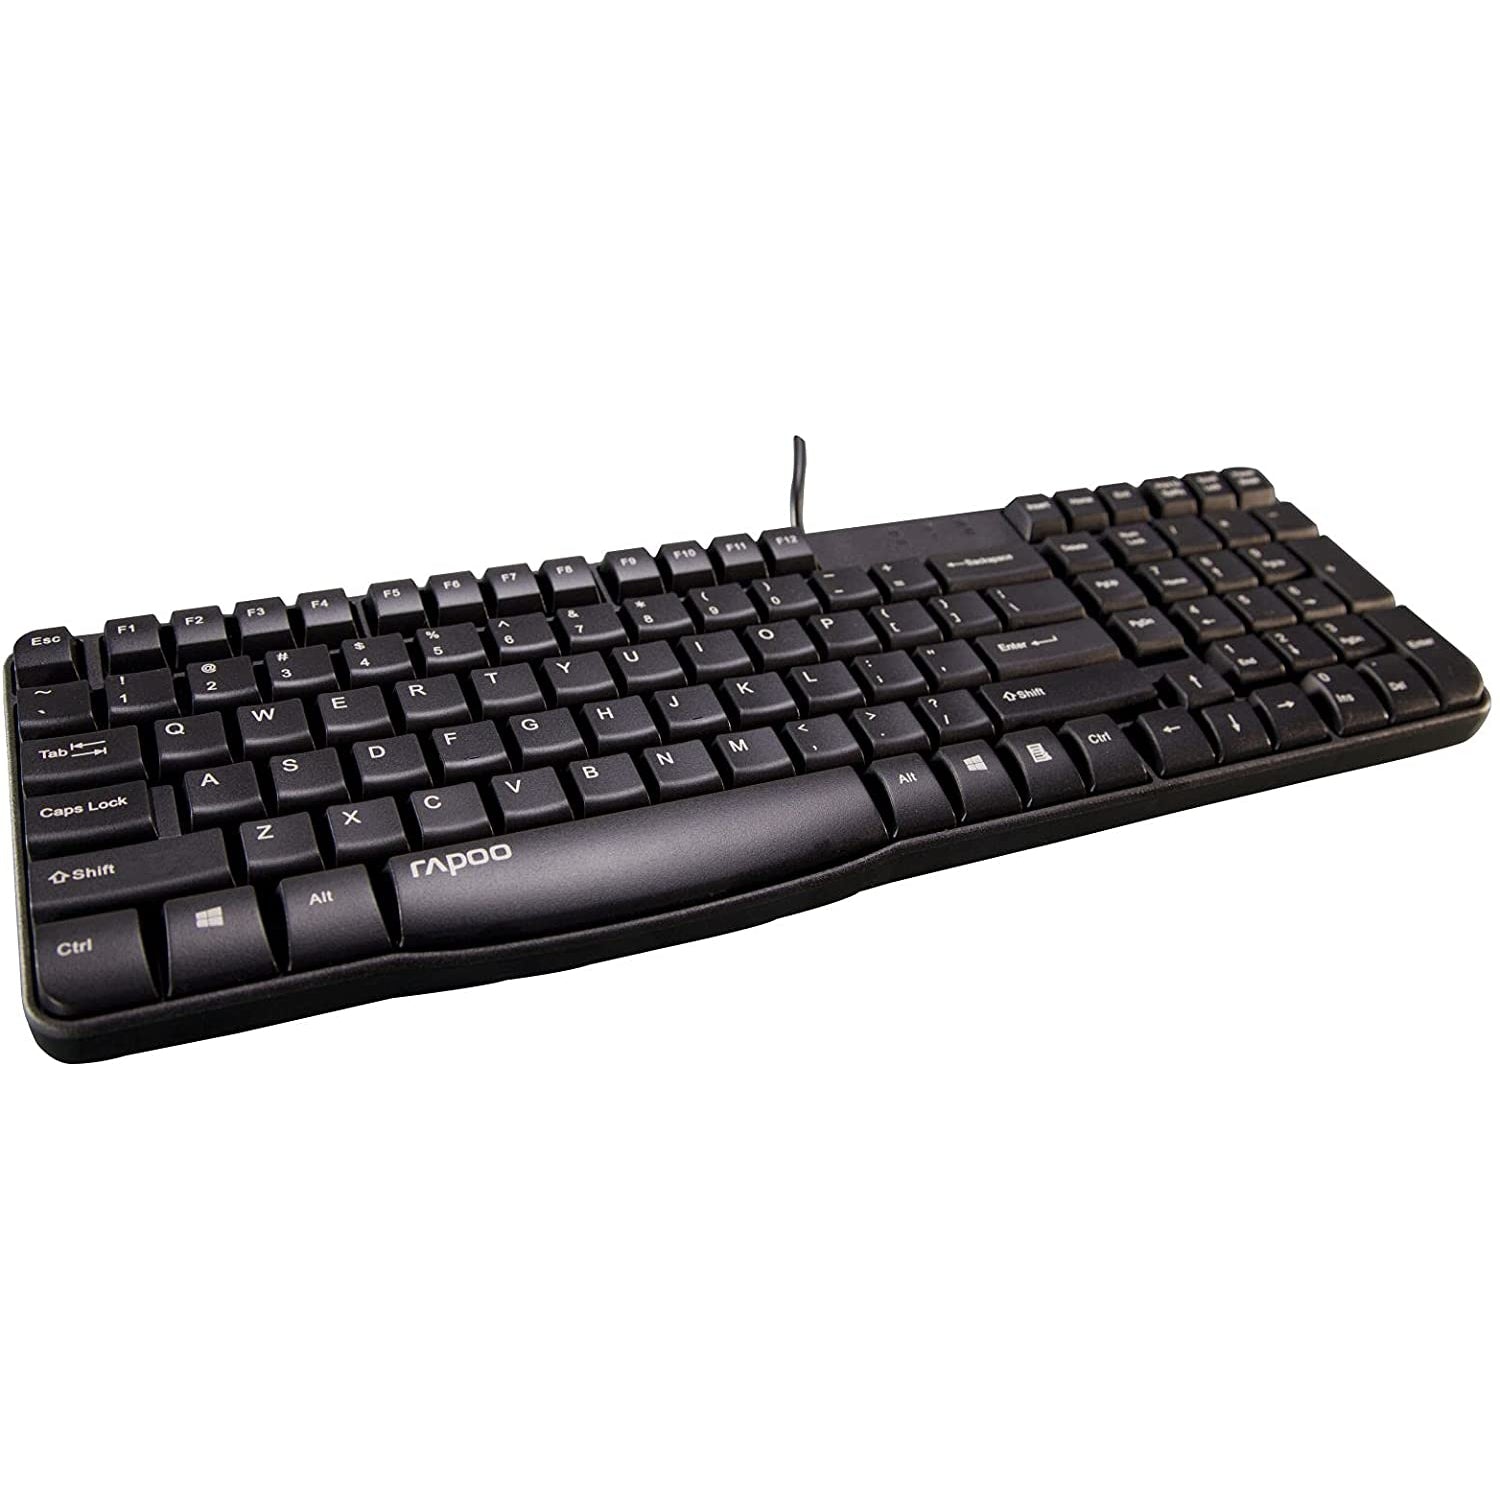 Rapoo N2400 Wired Spill-Resistant Keyboard - Black - Excellent